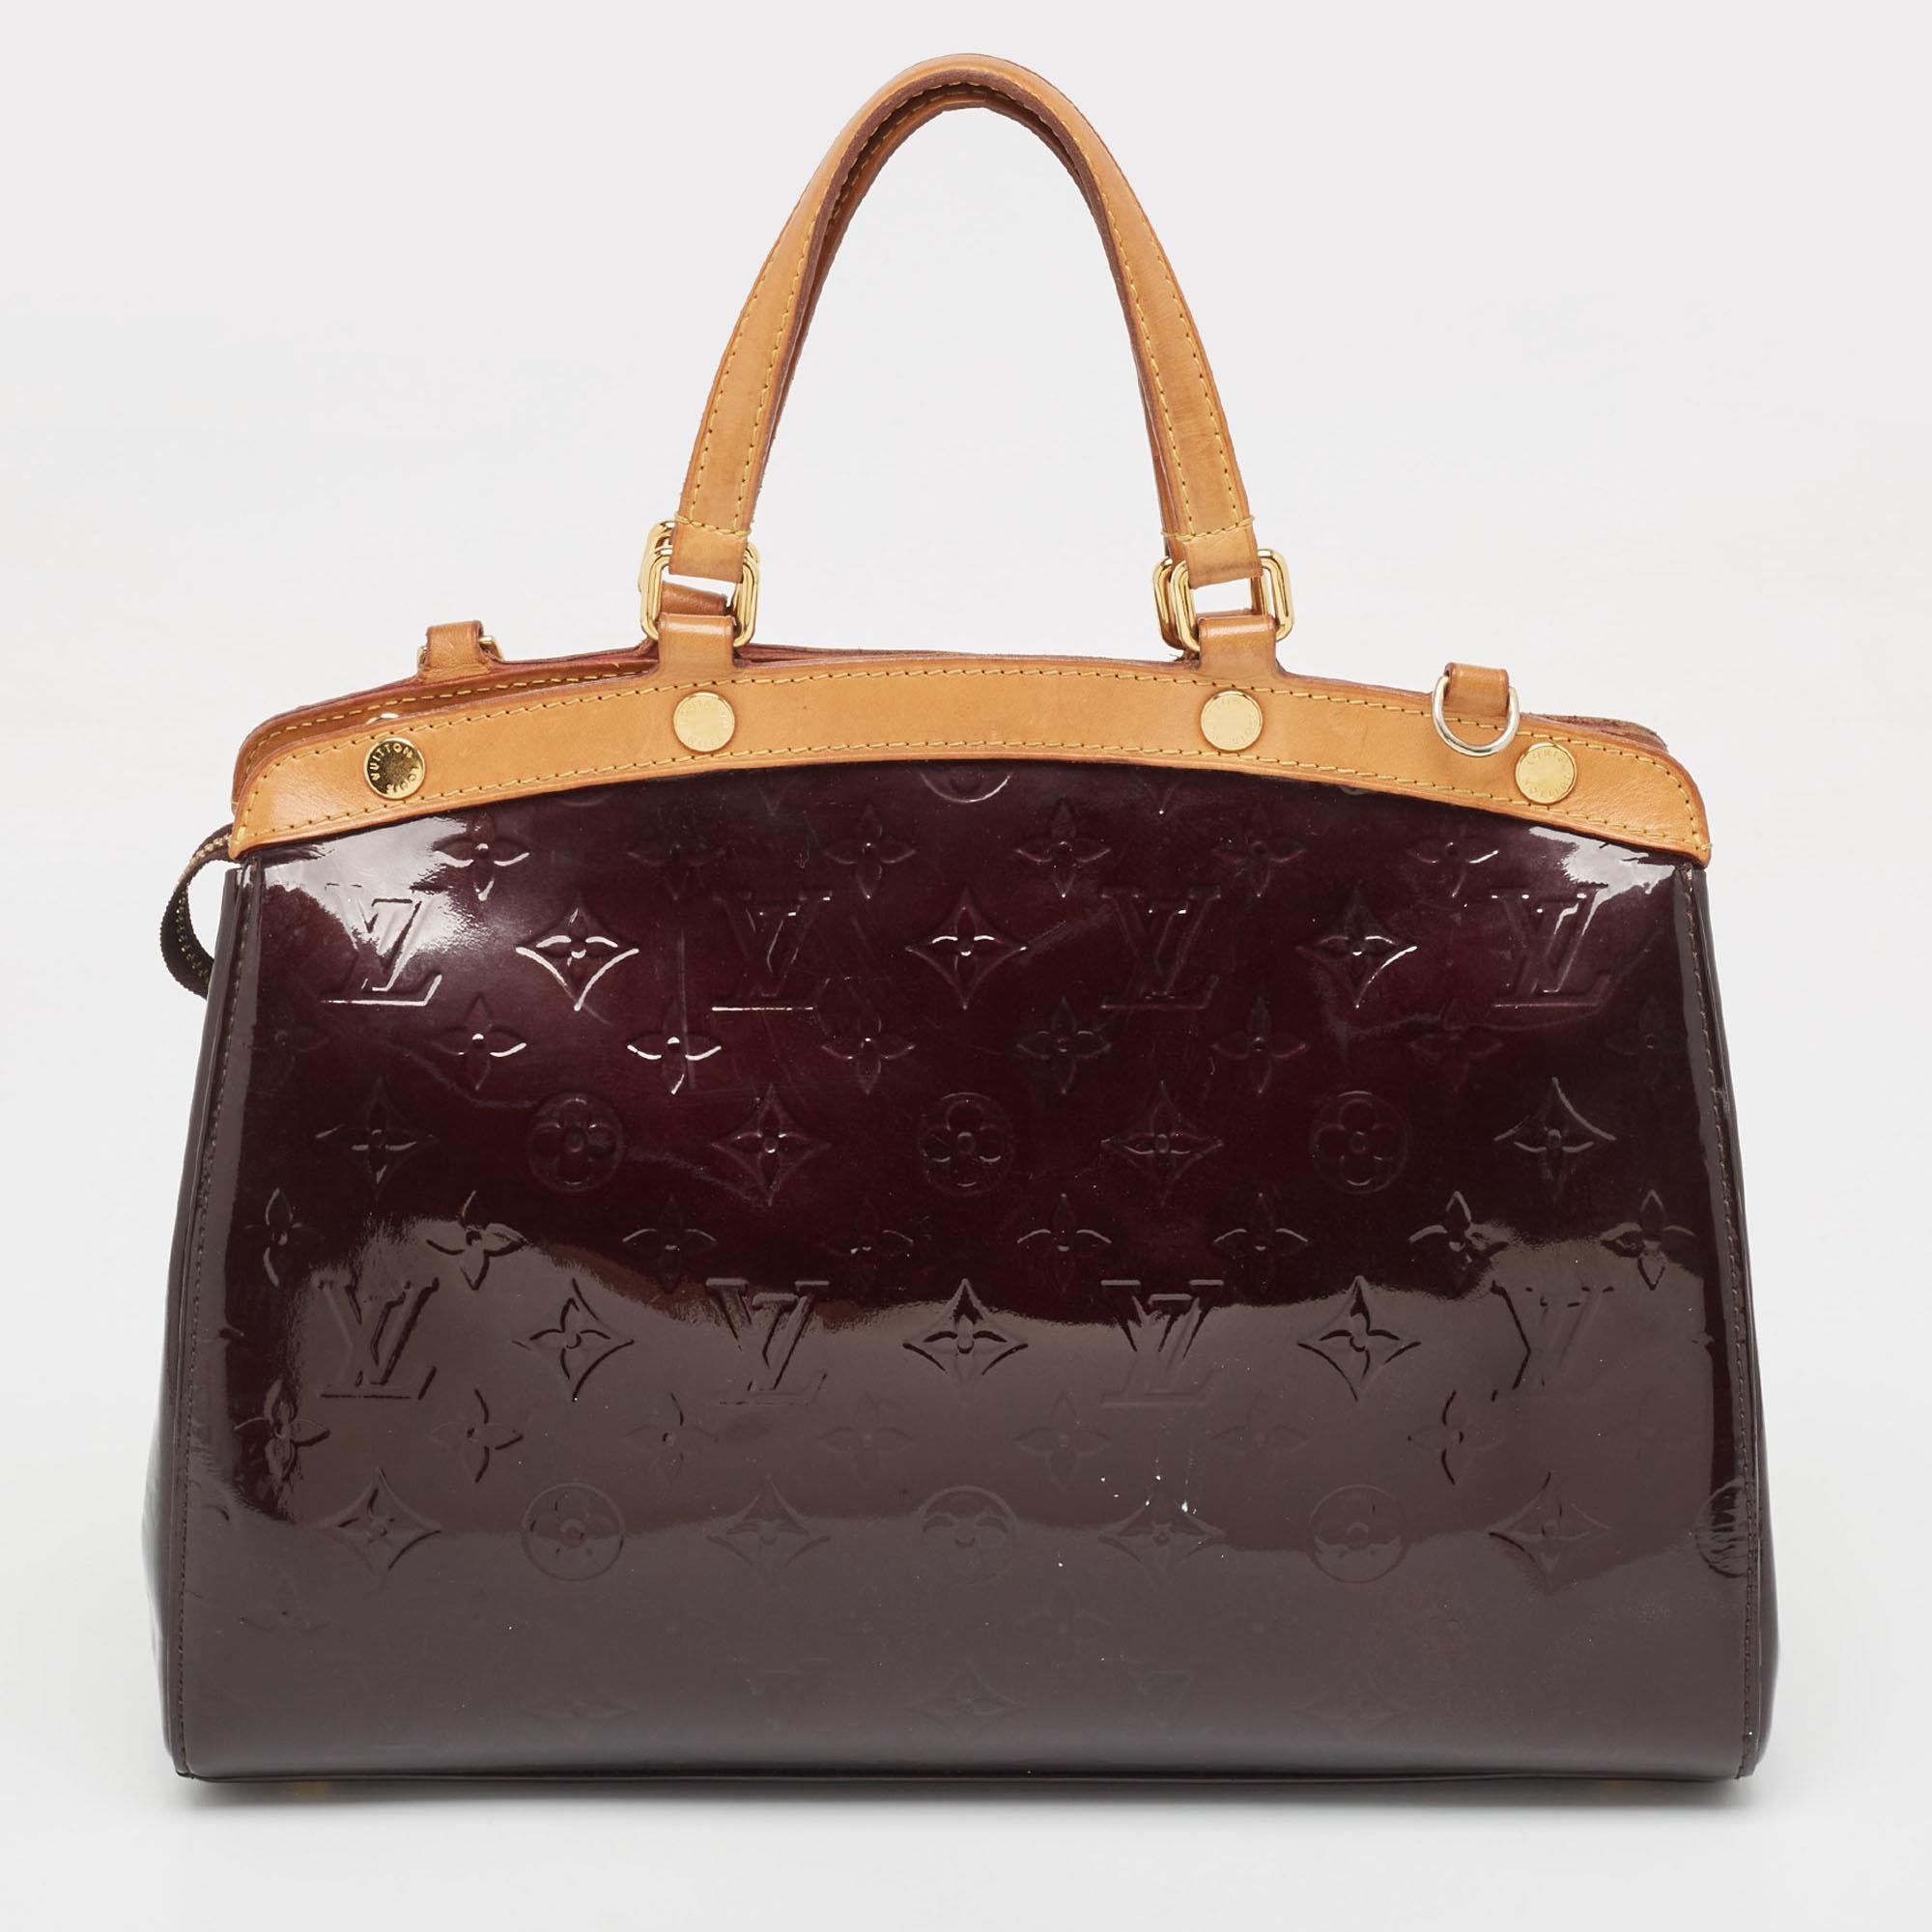 A creation that is both highly functional and appealing is the Brea by Louis Vuitton. Crafted from Monogram Vernis, this bag is held by dual handles and equipped with a spacious interior to hold your essentials with ease.

Includes: Detachable Strap